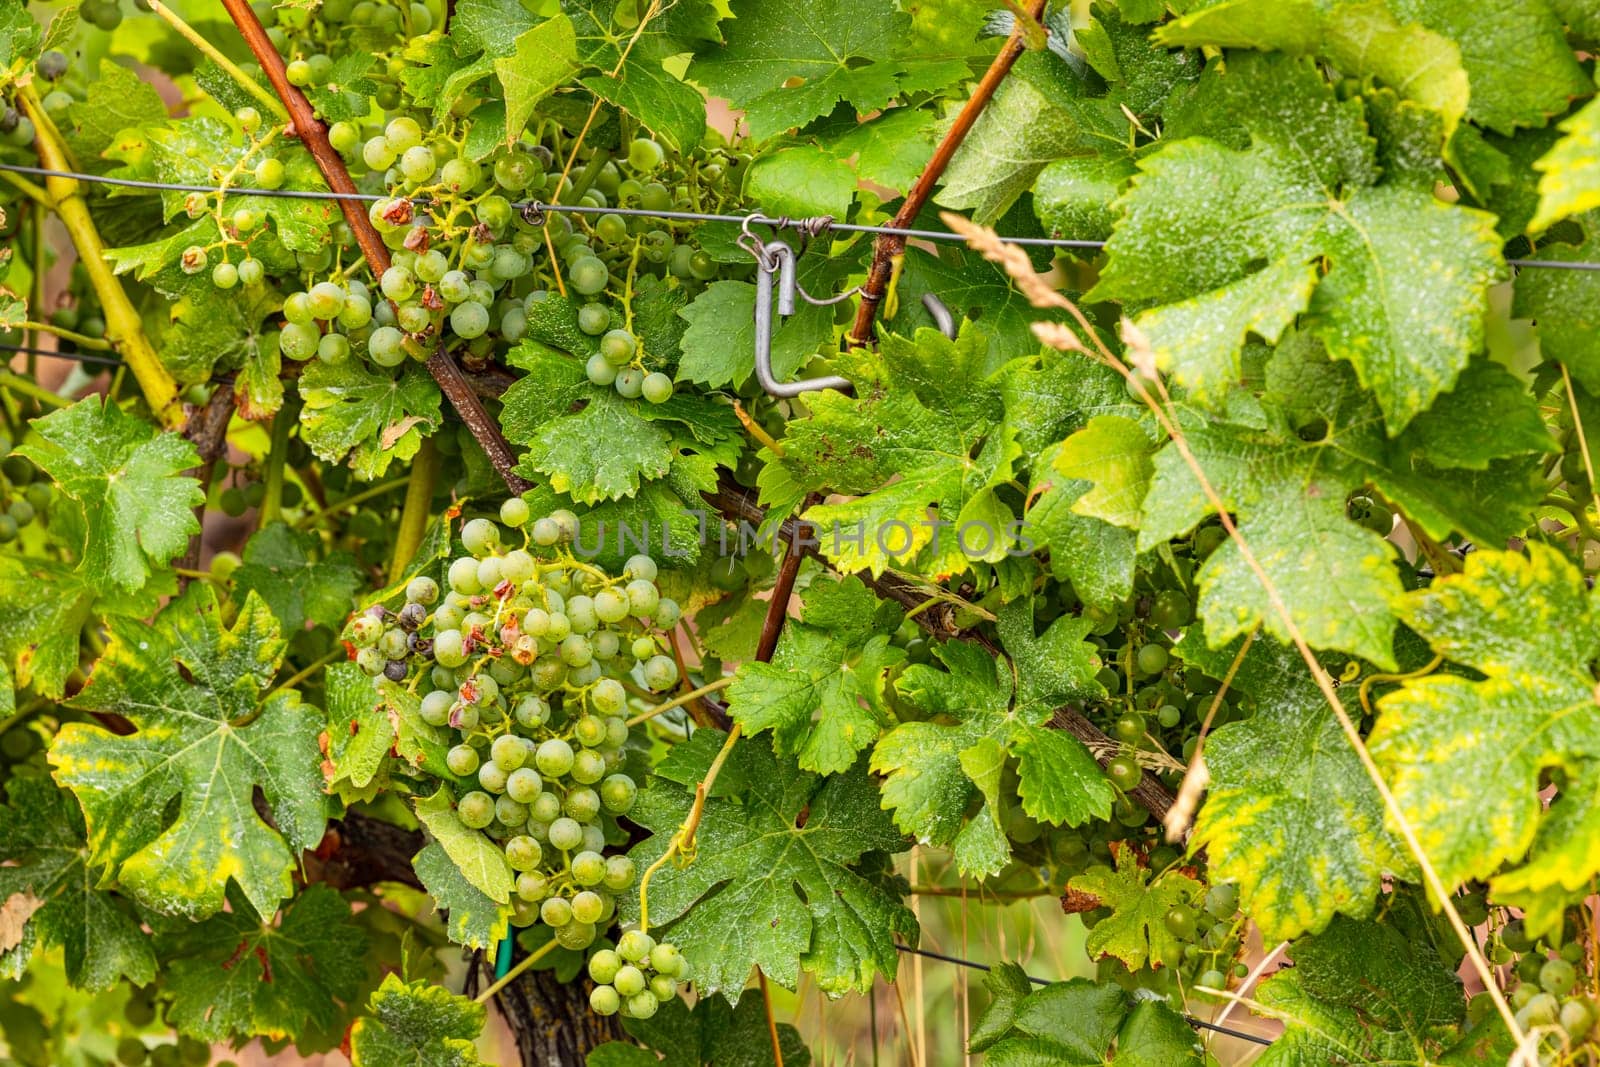 Panicles of white grapes on a vine with green leaves in a vineyard, Germany